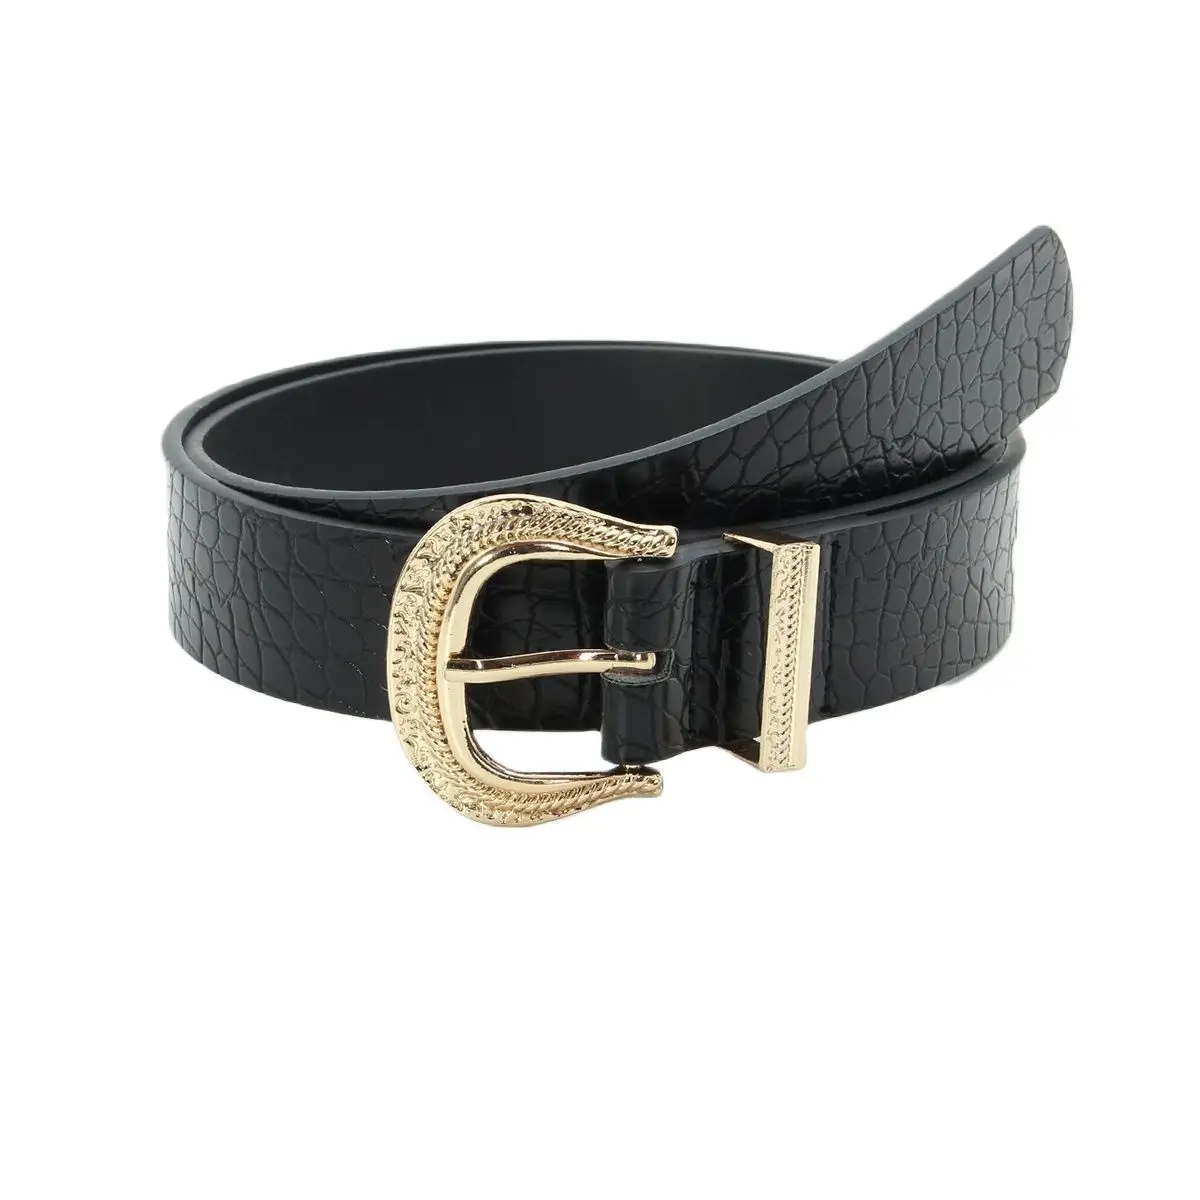 GOOWAIL Alloy Buckle Belts Female Decor Accessories Solid Color Waistband Black White Women Belts Girls Gift